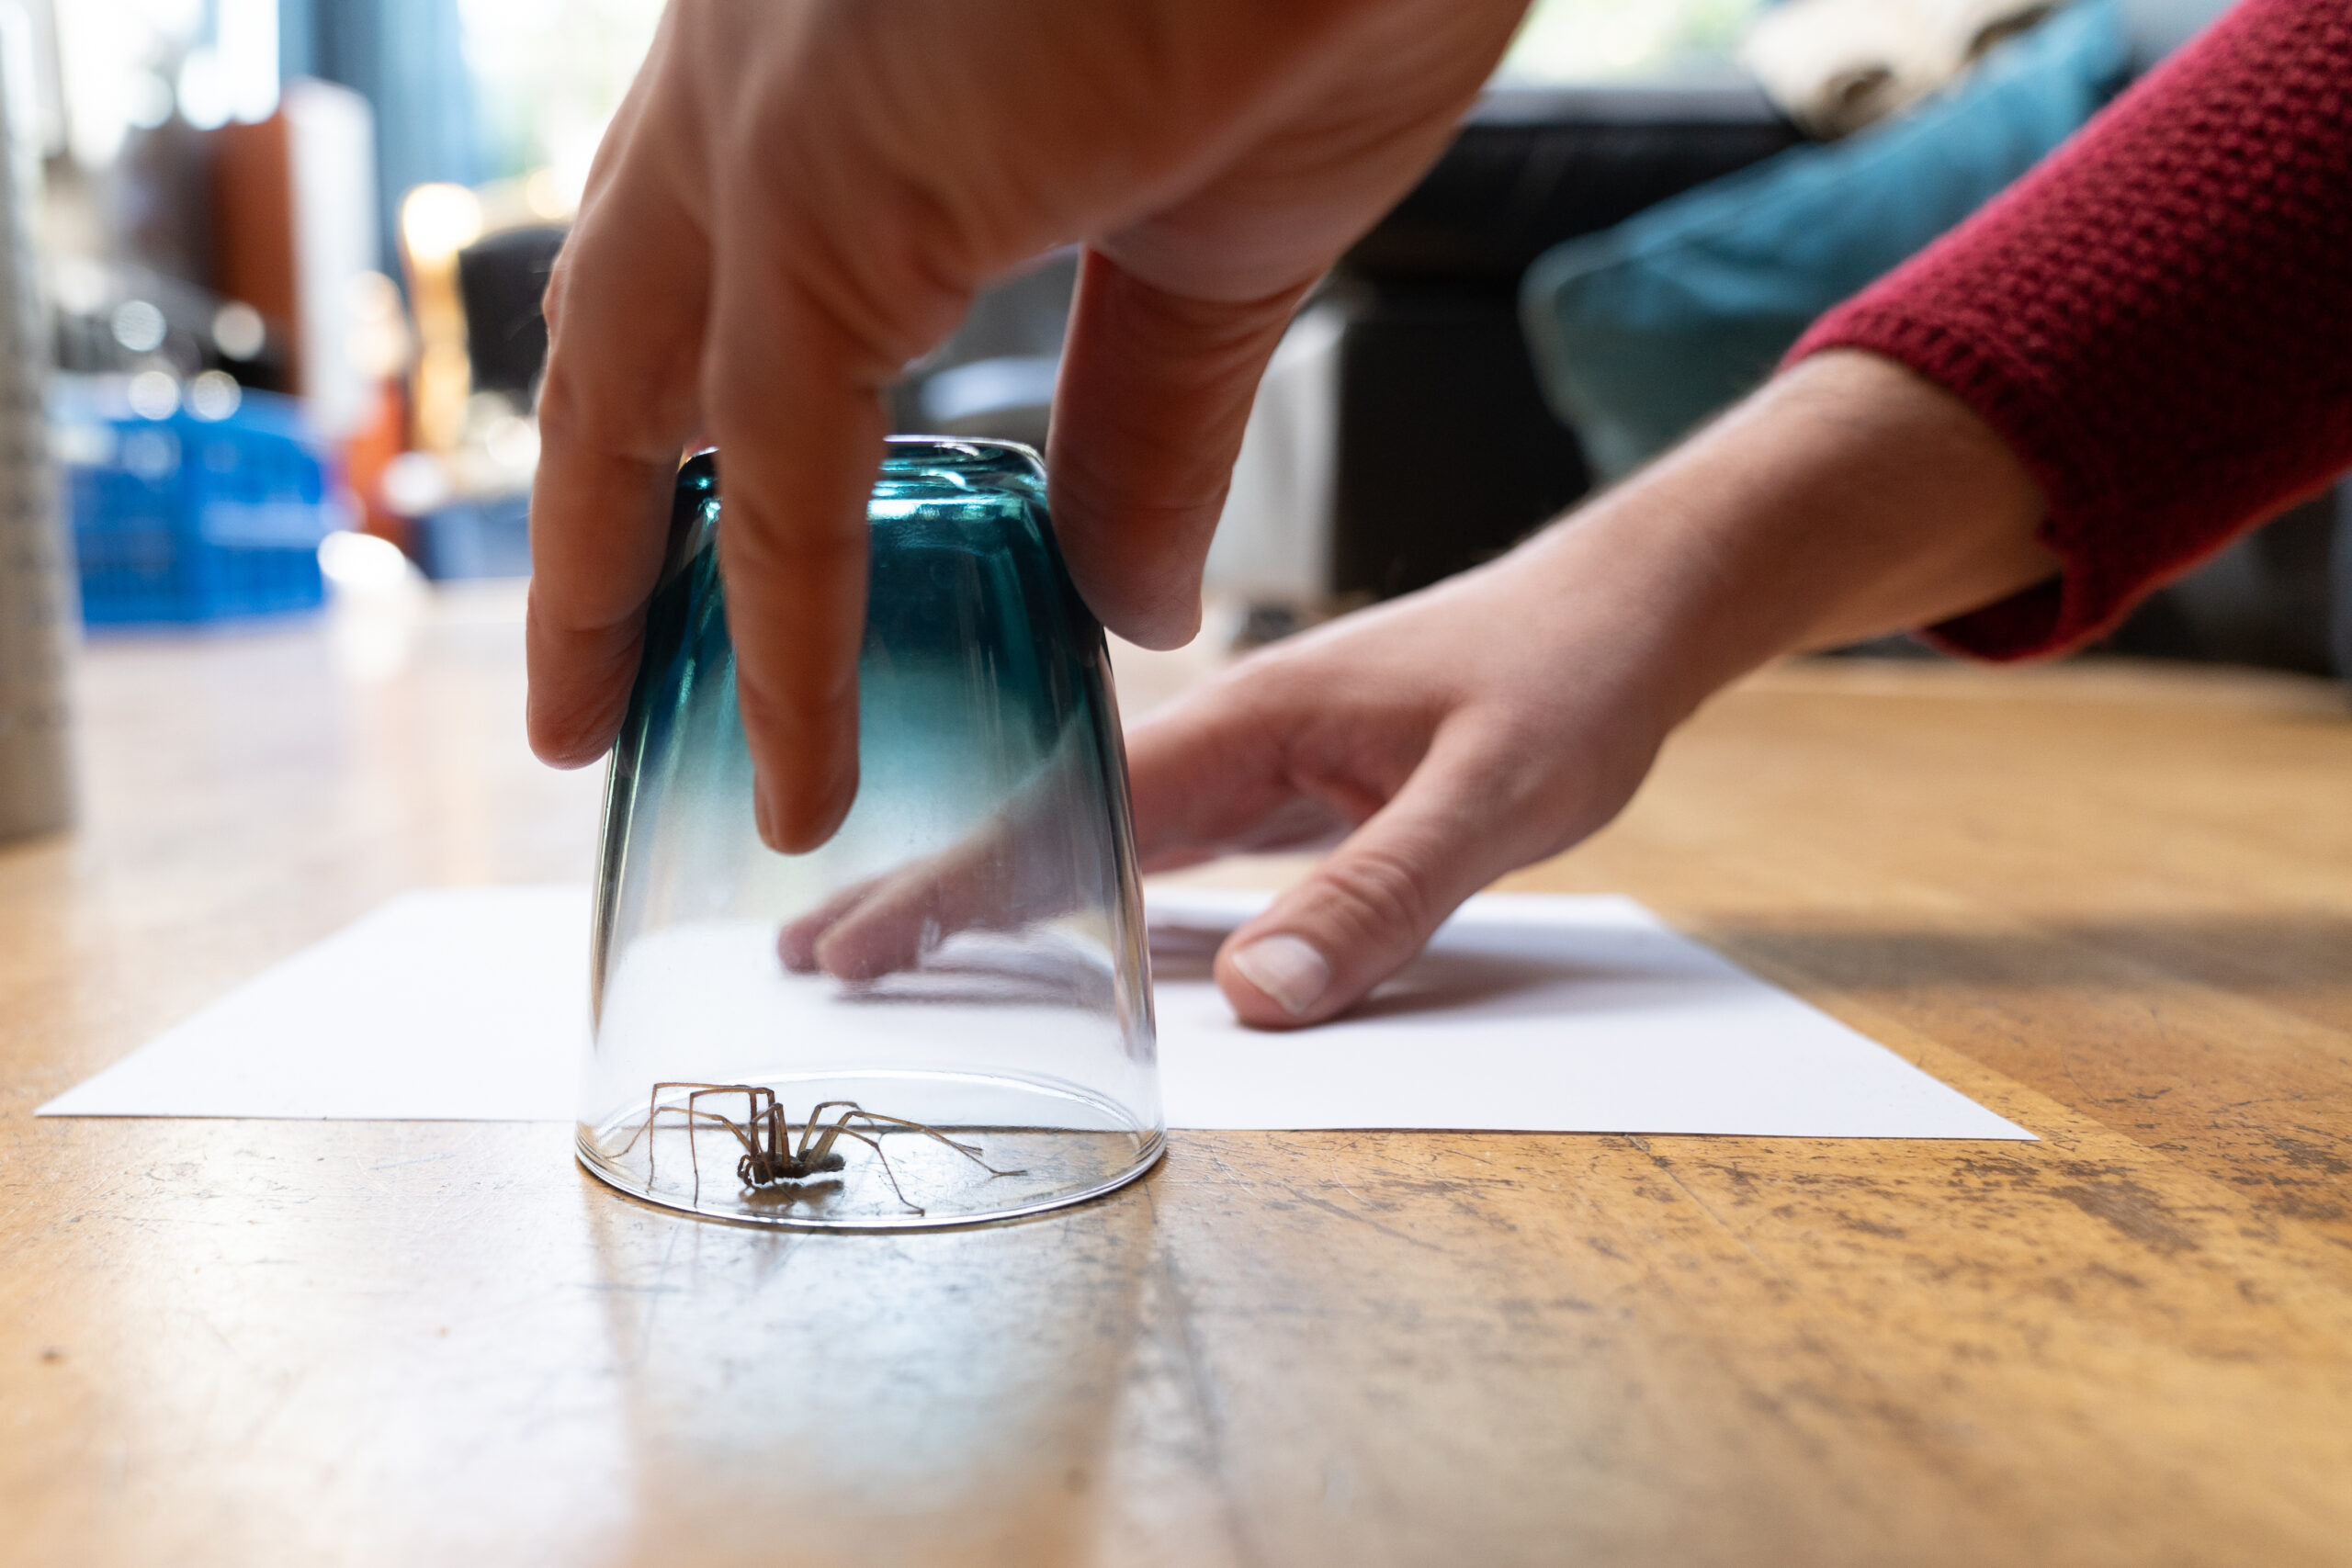 A Caught big dark common house spider under a drinking glass on a smooth wooden floor seen from ground level in a living room in a residential home with two male hands